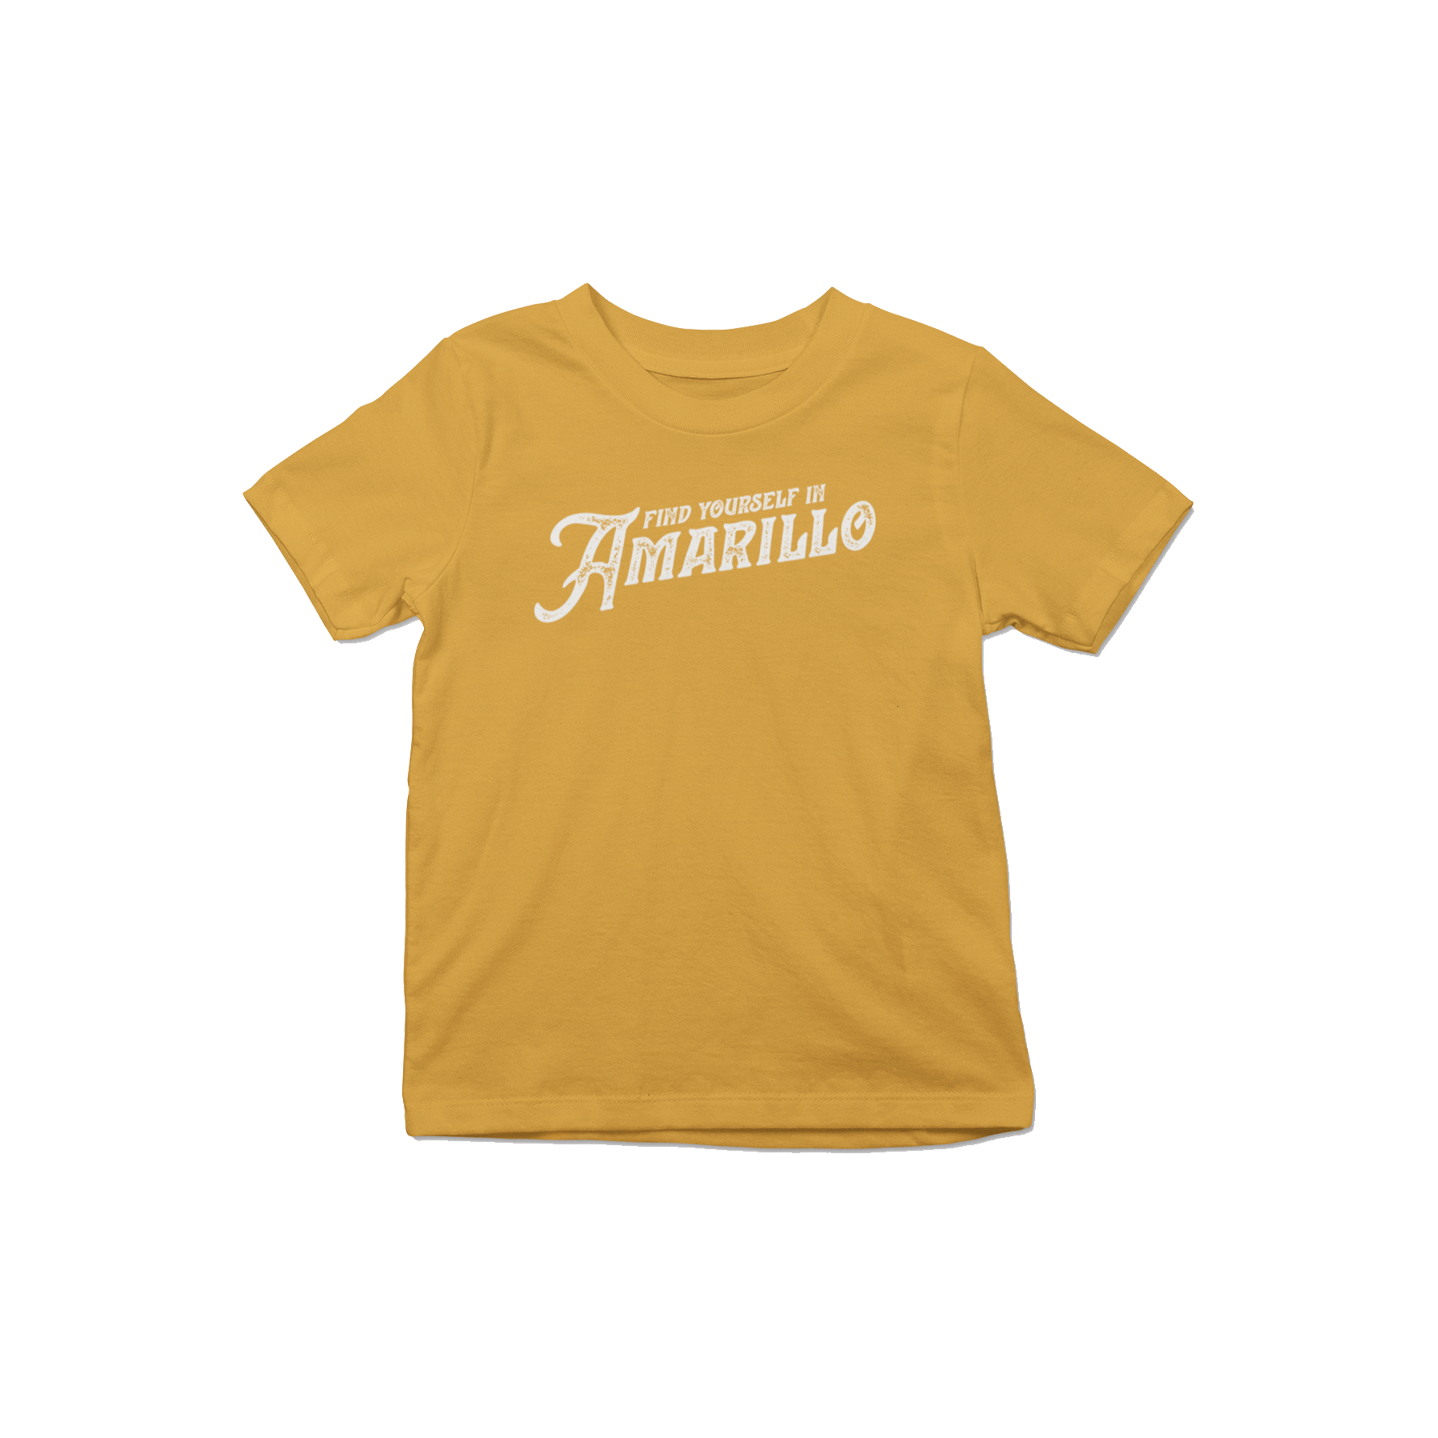 Amarillo Texas Toddler T-shirt - Find Yourself